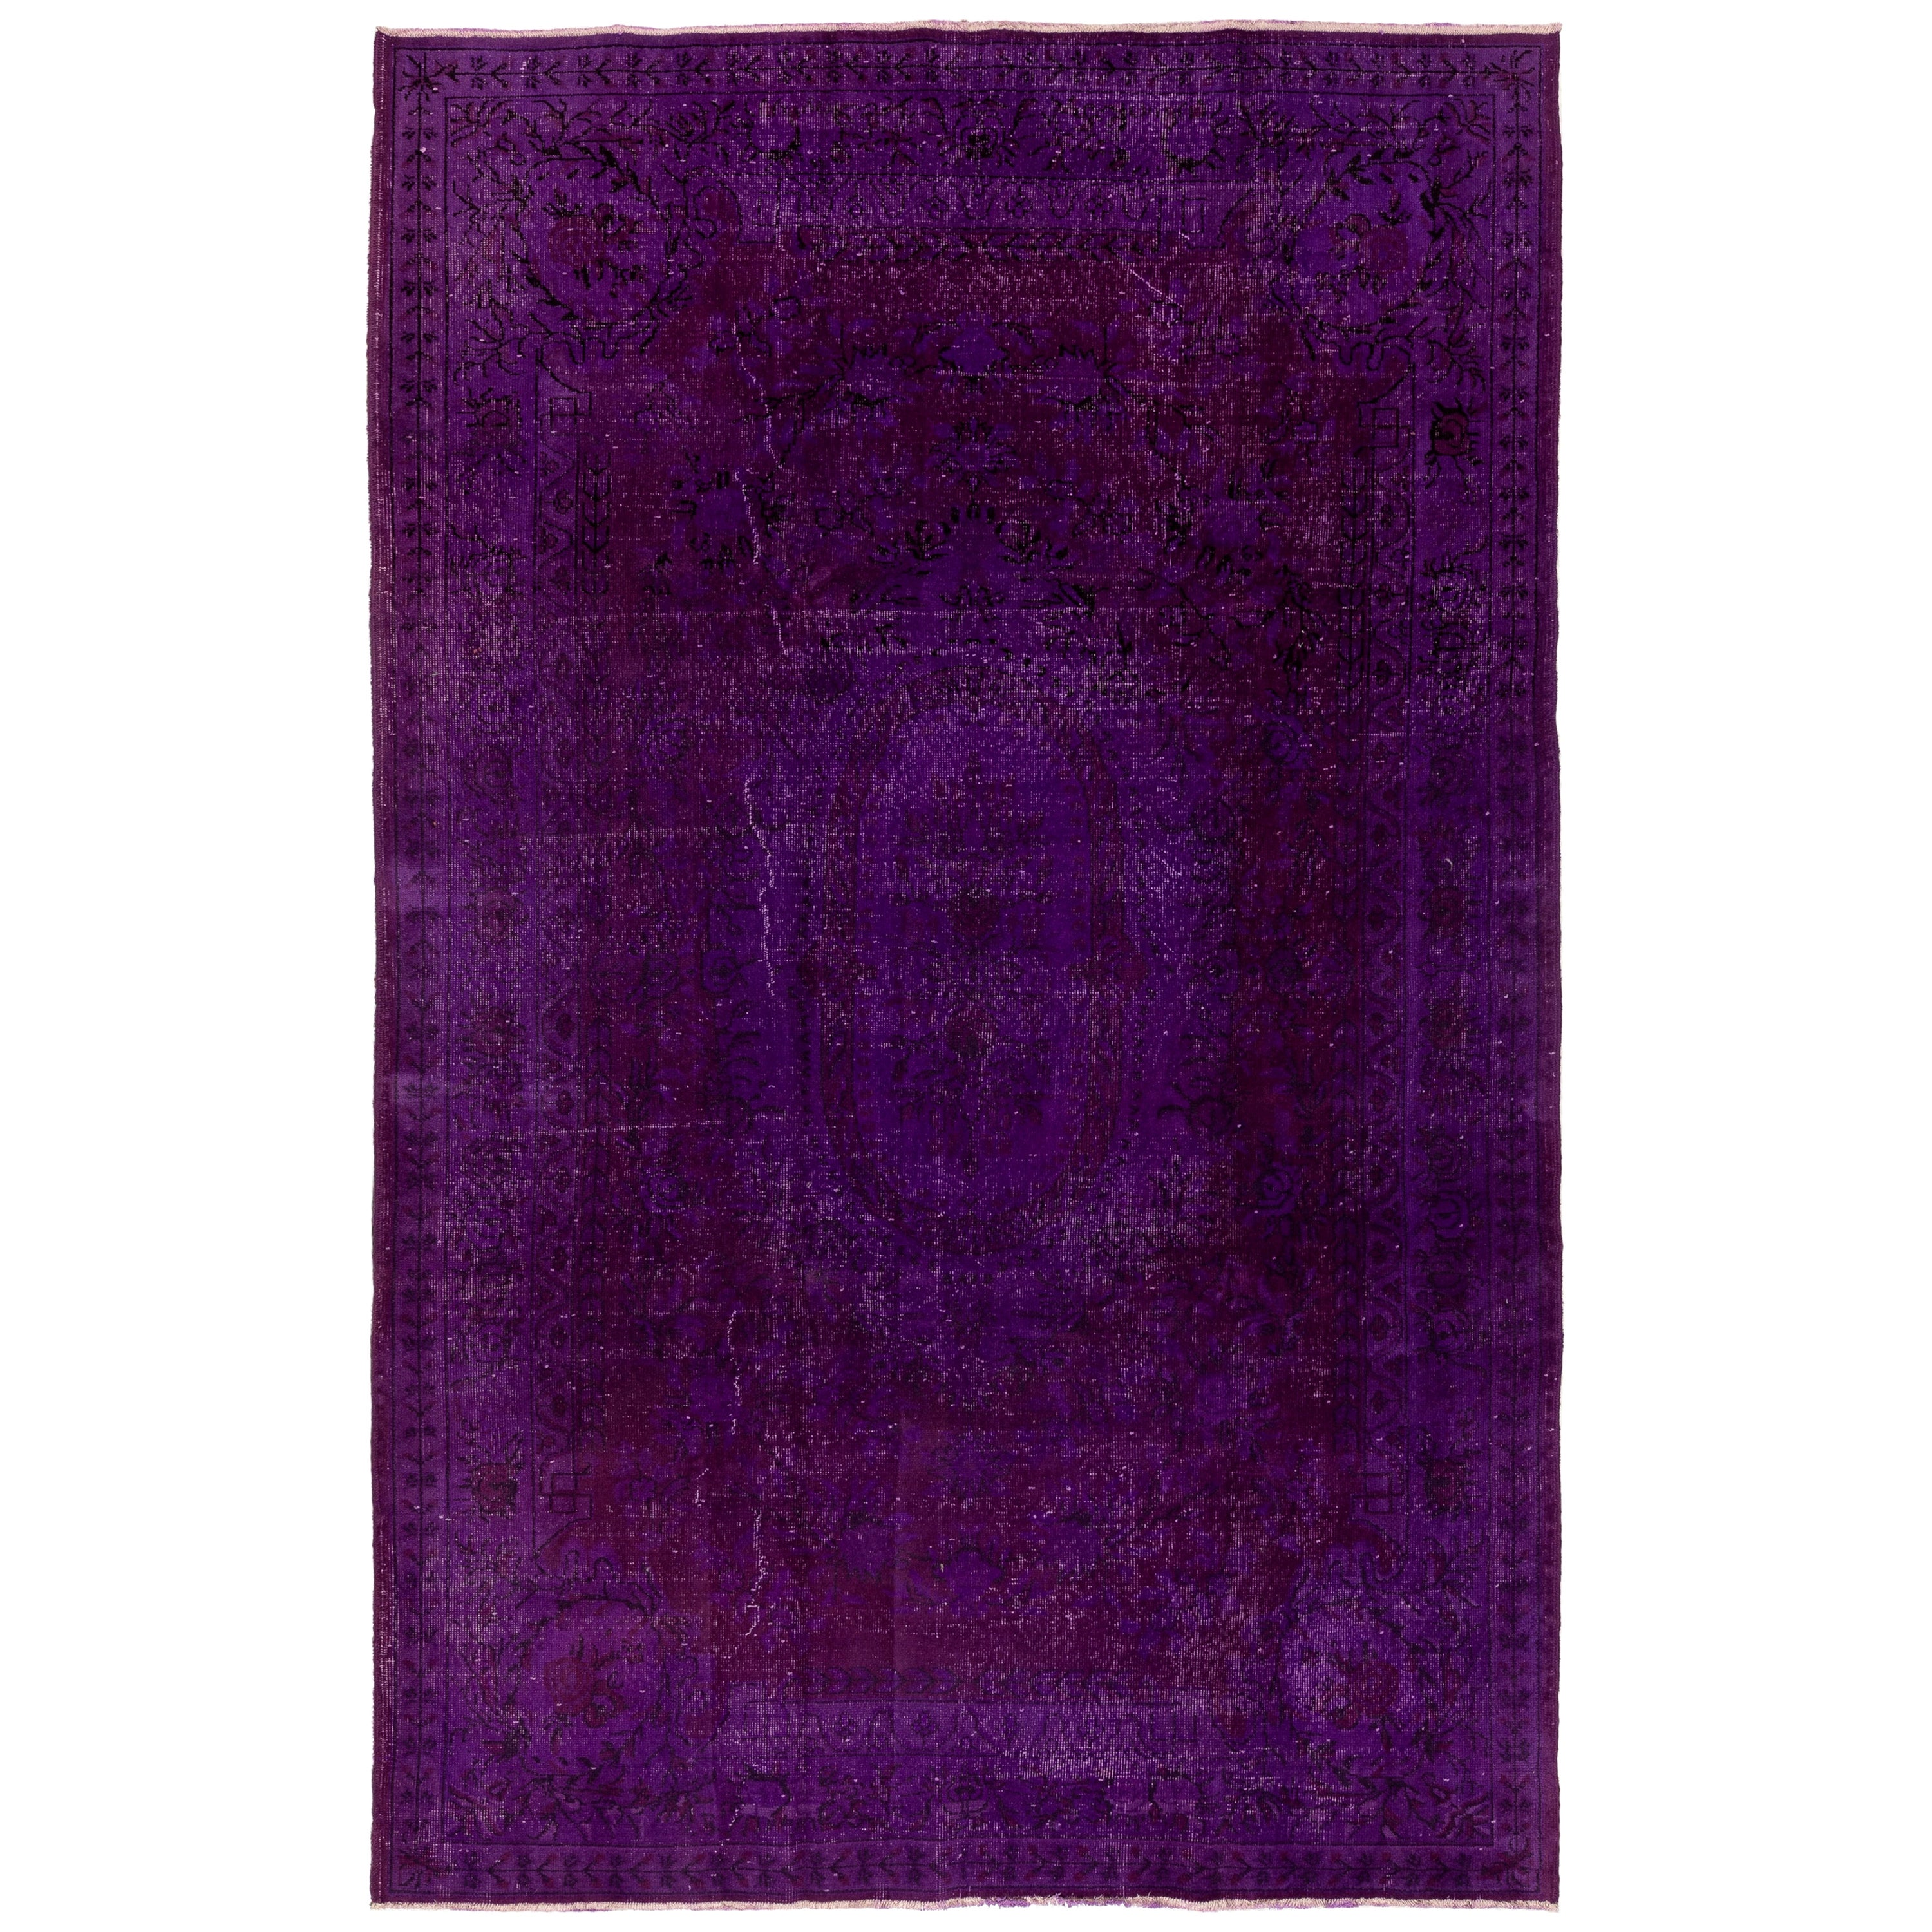 6.8x10 Ft Handmade Turkish Area Rug in Purple. Ideal for Contemporary Interiors